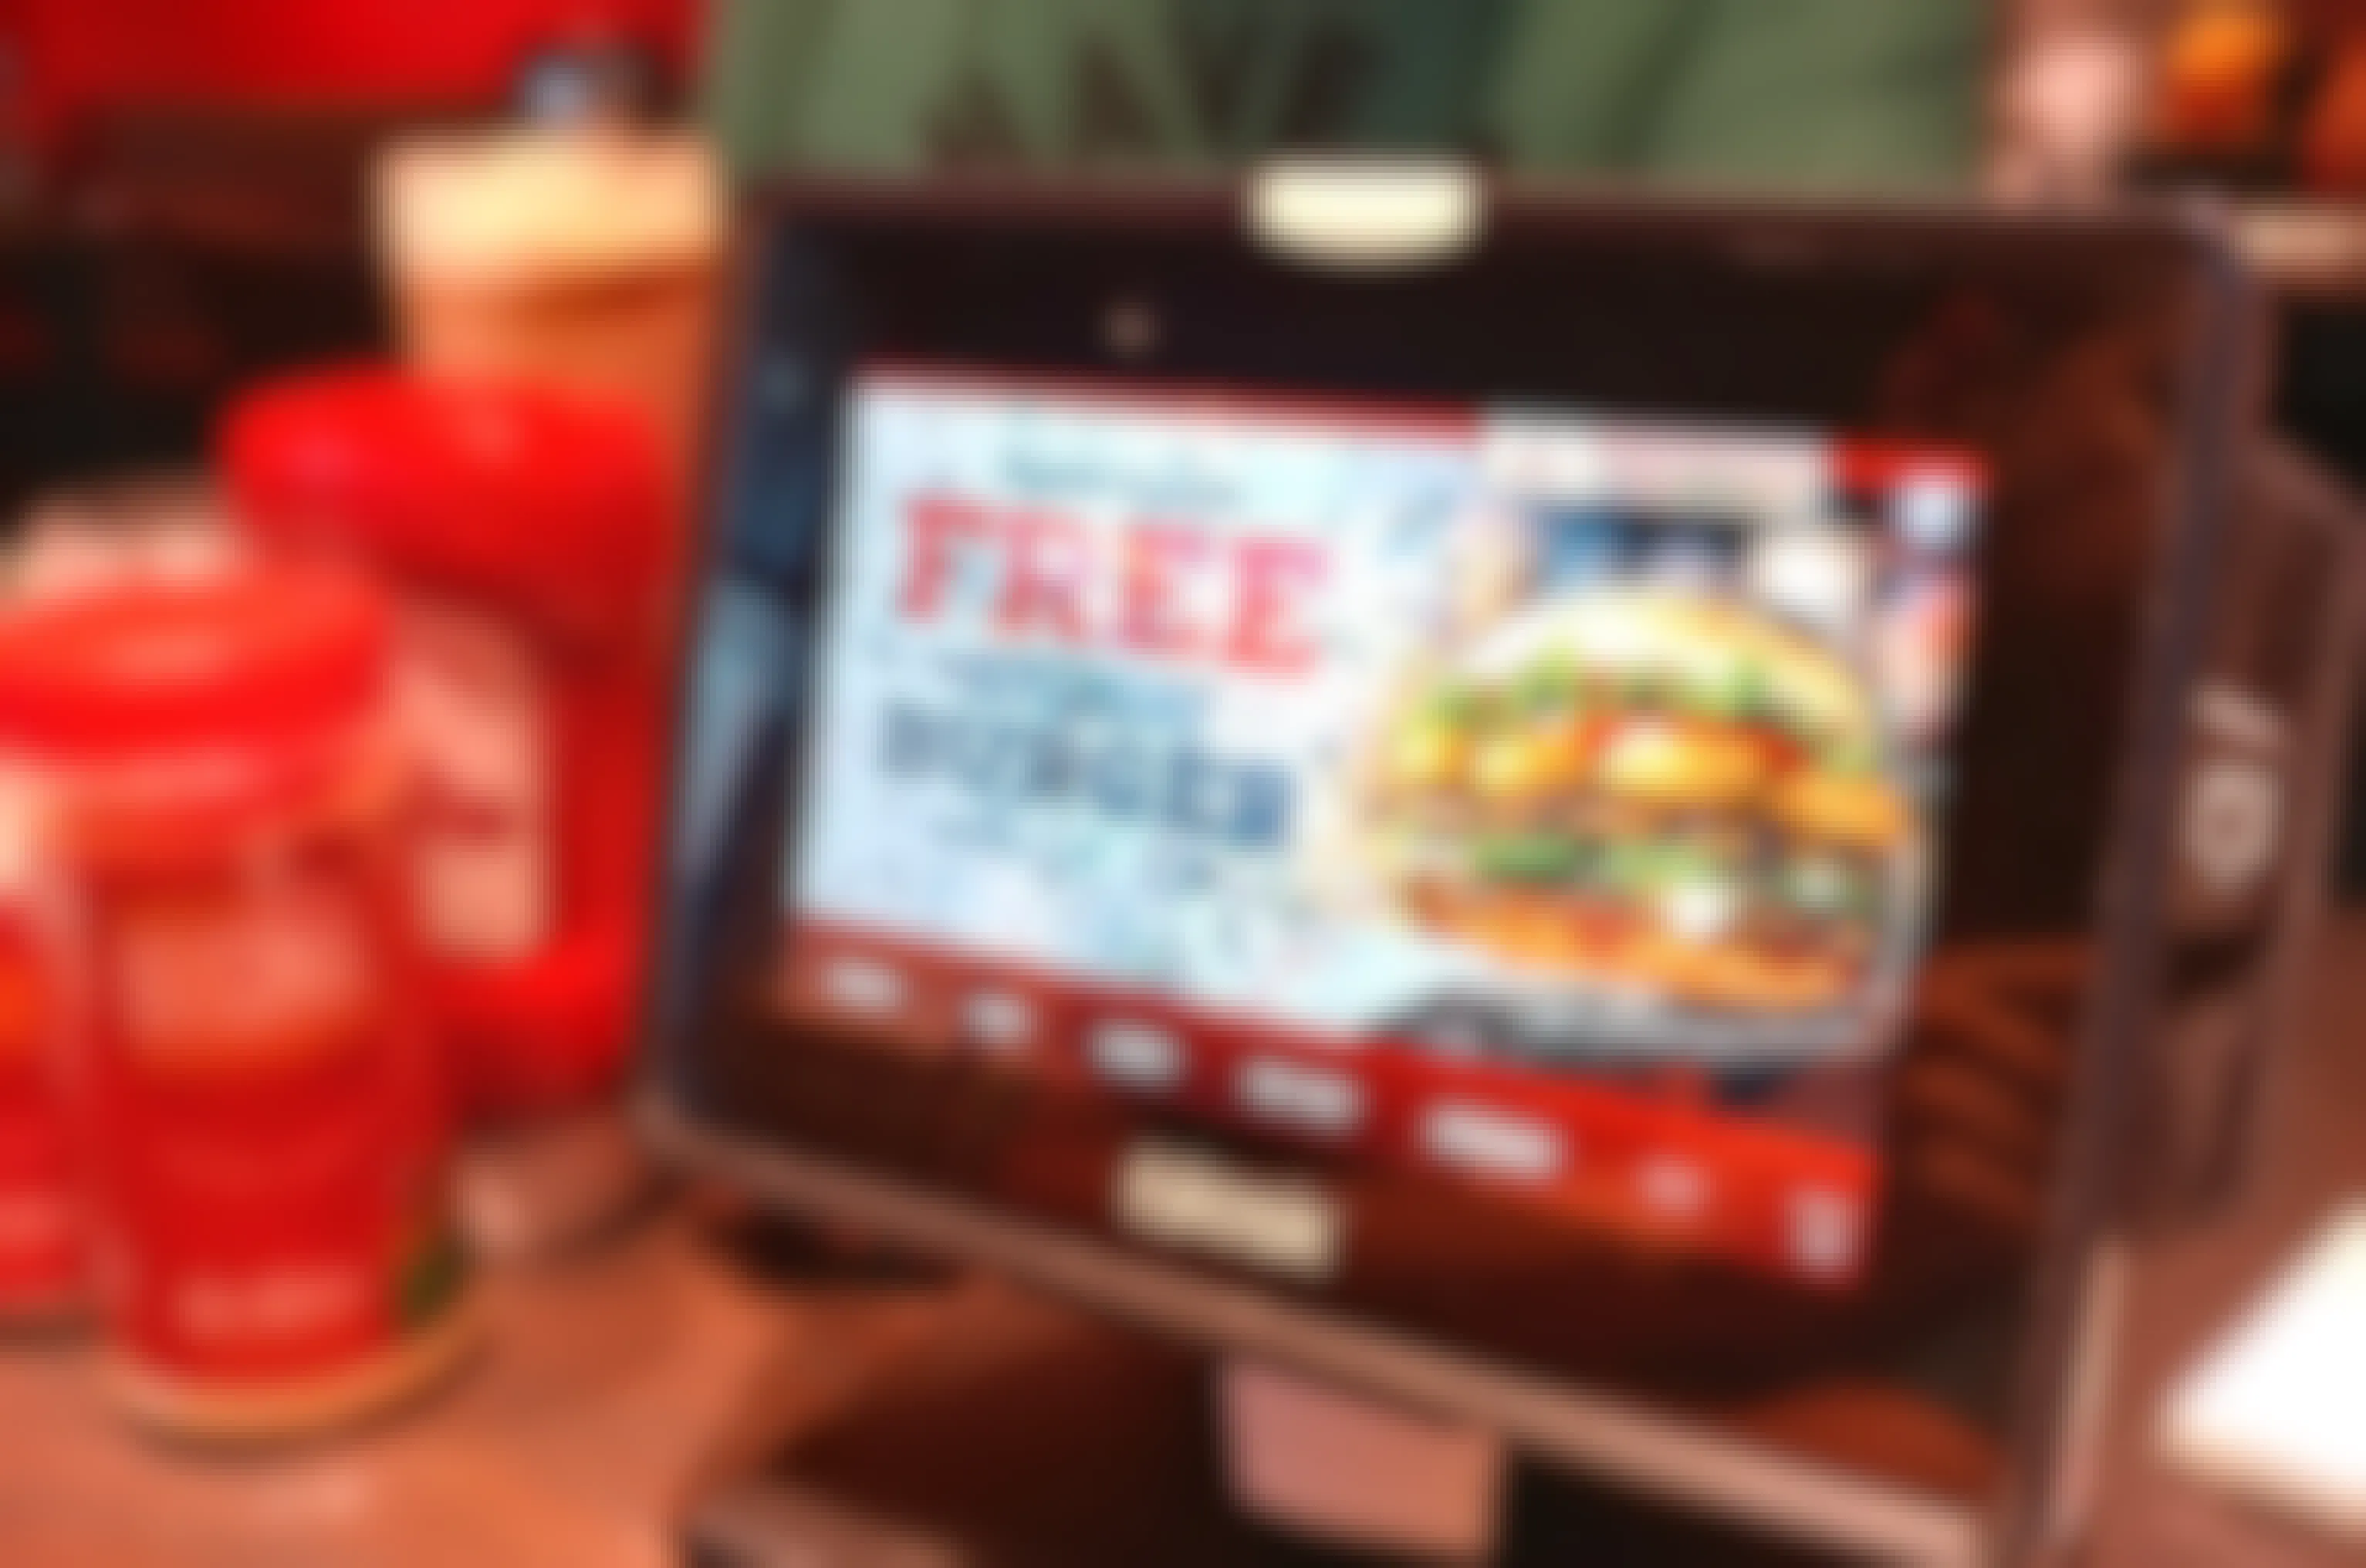 Photo of Red Robin table kiosk displaying an offer for a free birthday burger.